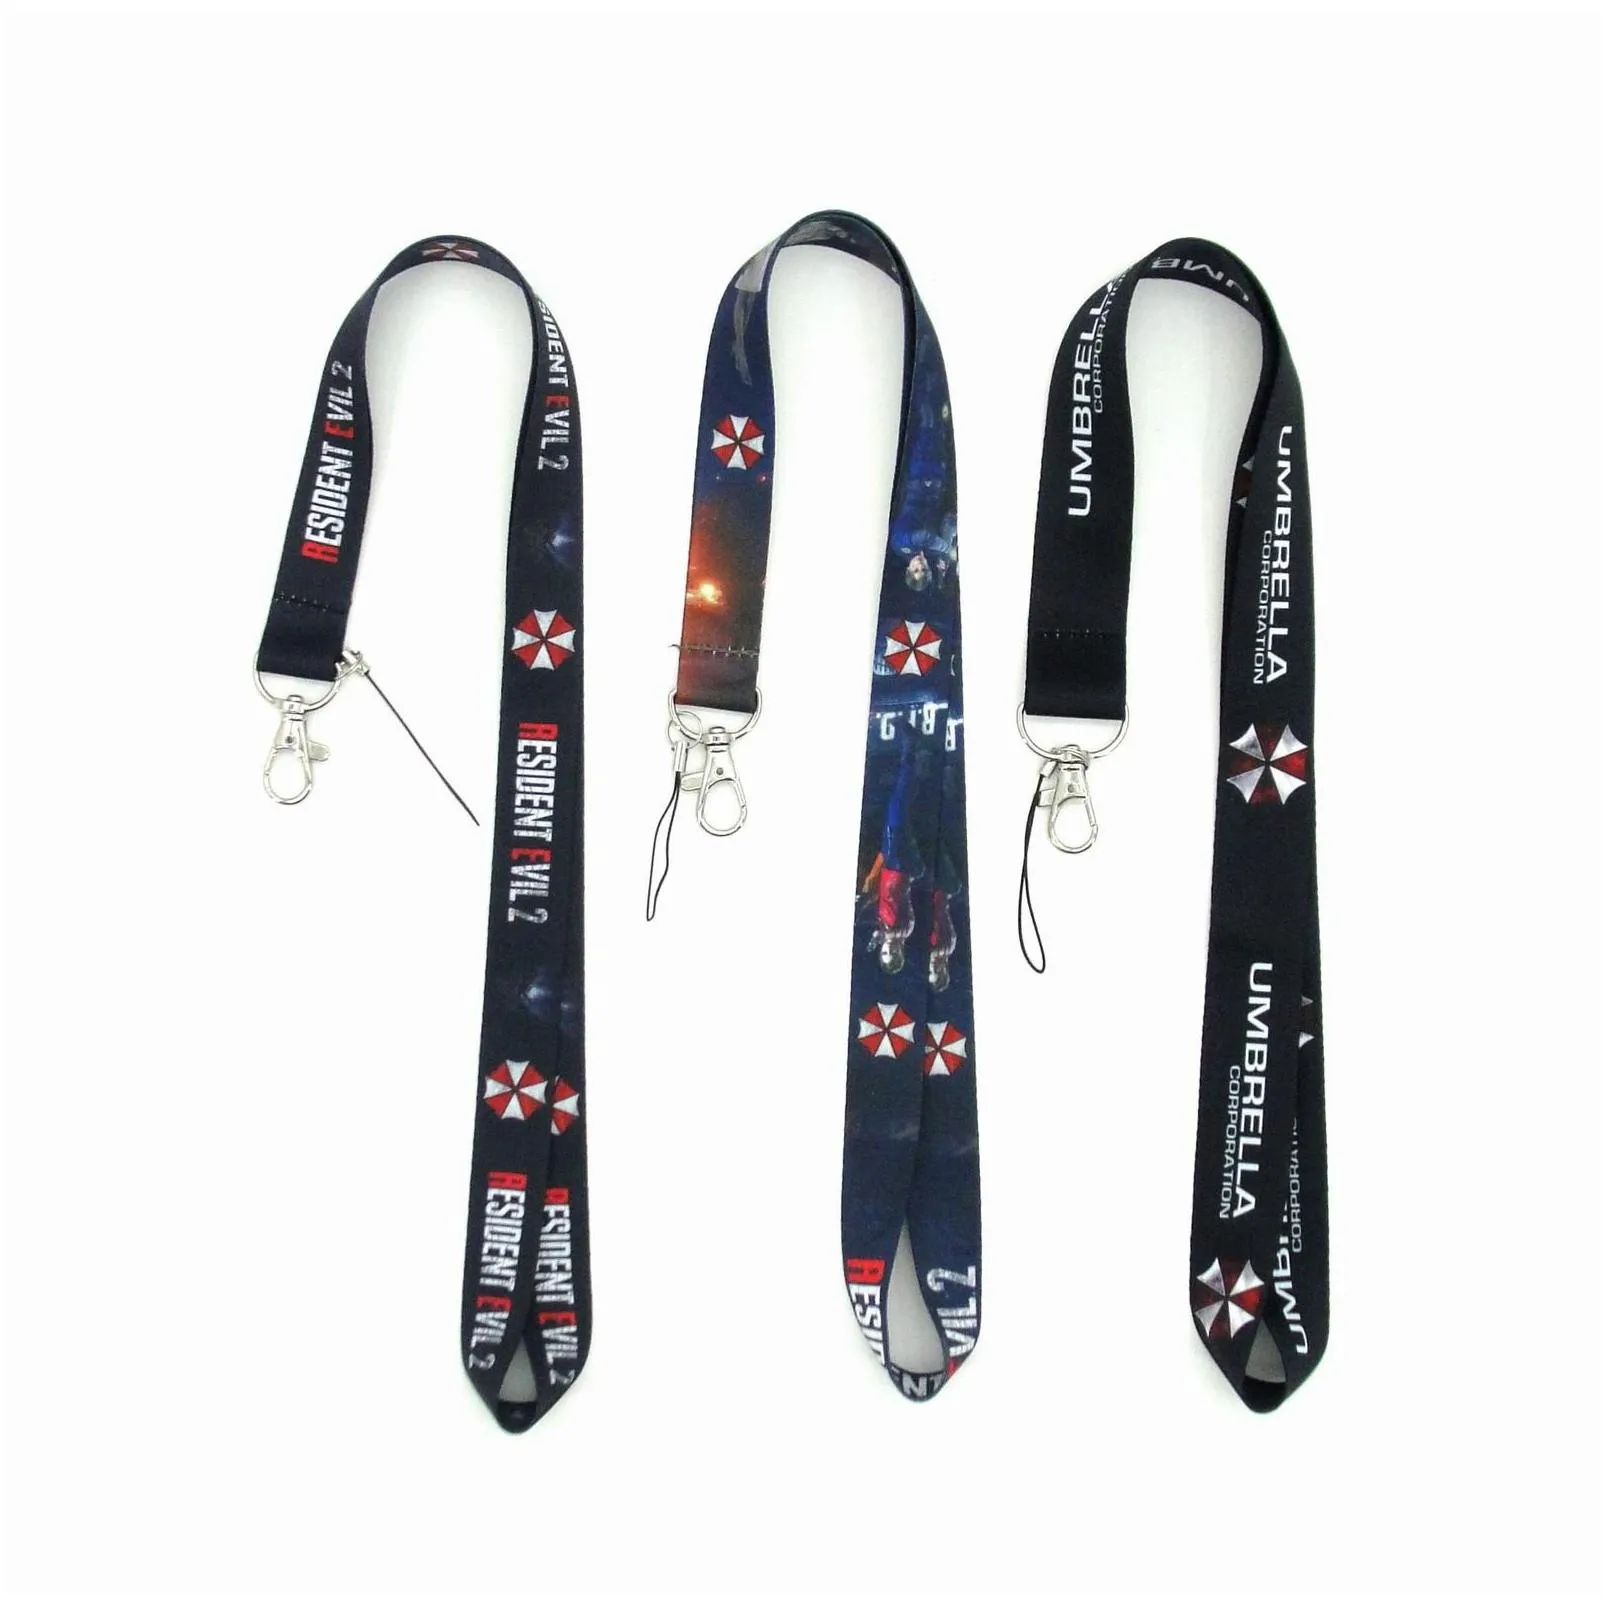 Cell Phone Straps & Charms 20pcs Cartoon Movie Lanyard Strap For Keychain ID Card Cover Pass Gym USB Badge Holder Key Ring Neck Straps Accessories Jewelry